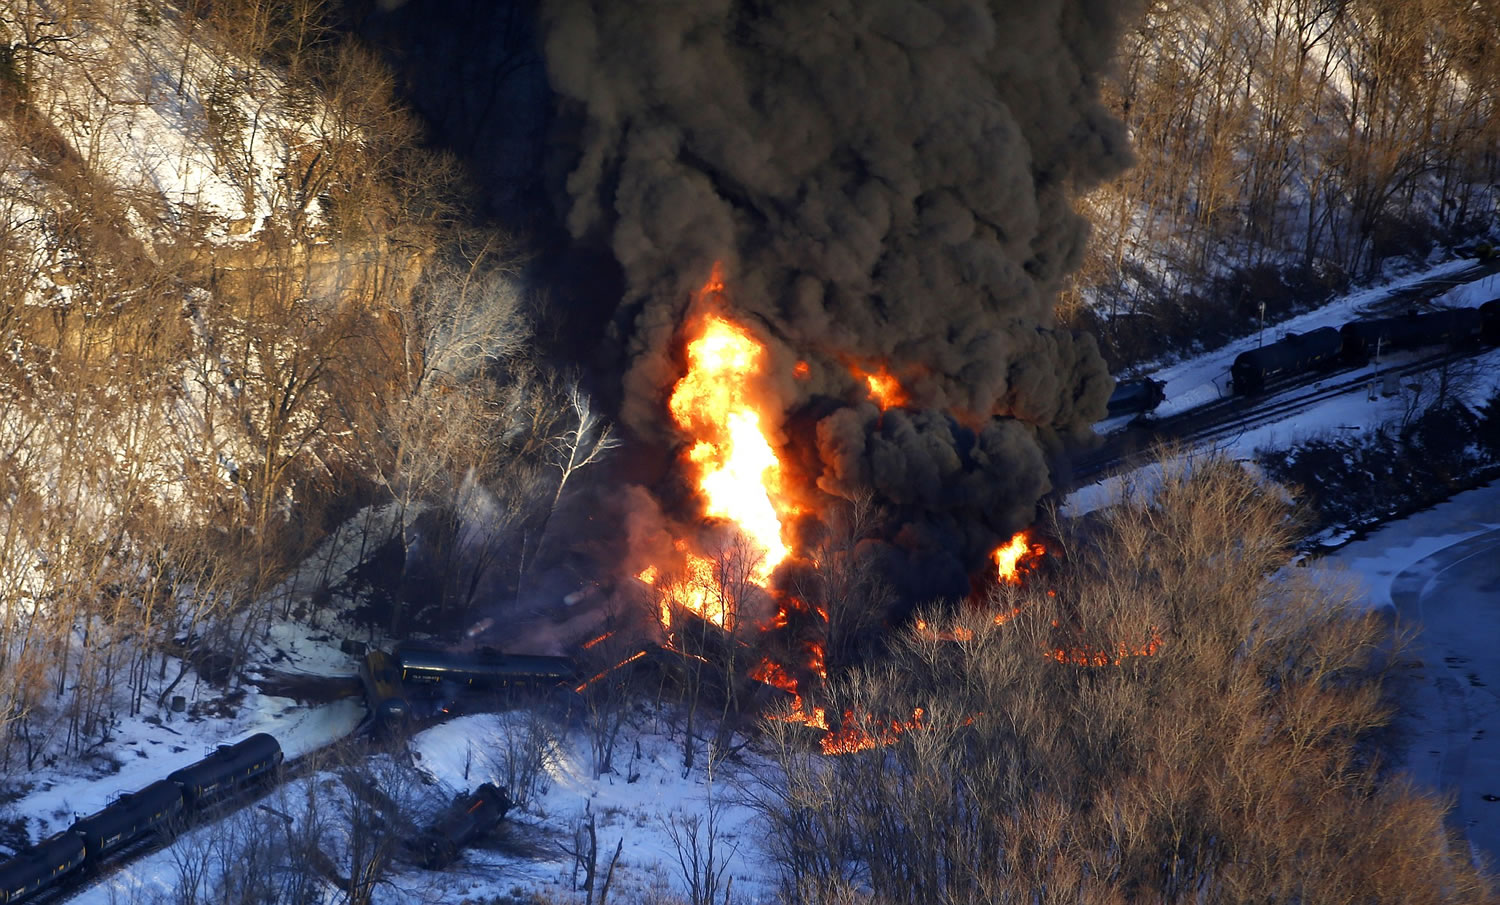 Mike Burley/Telegraph Herald files
Smoke and flames erupt from the scene of a crude oil train derailment March 5 near Galena, Ill. The derailment was one of a string of train crashes that have kept the acting head of the Federal Railroad Administration hopping in her two months on the job.